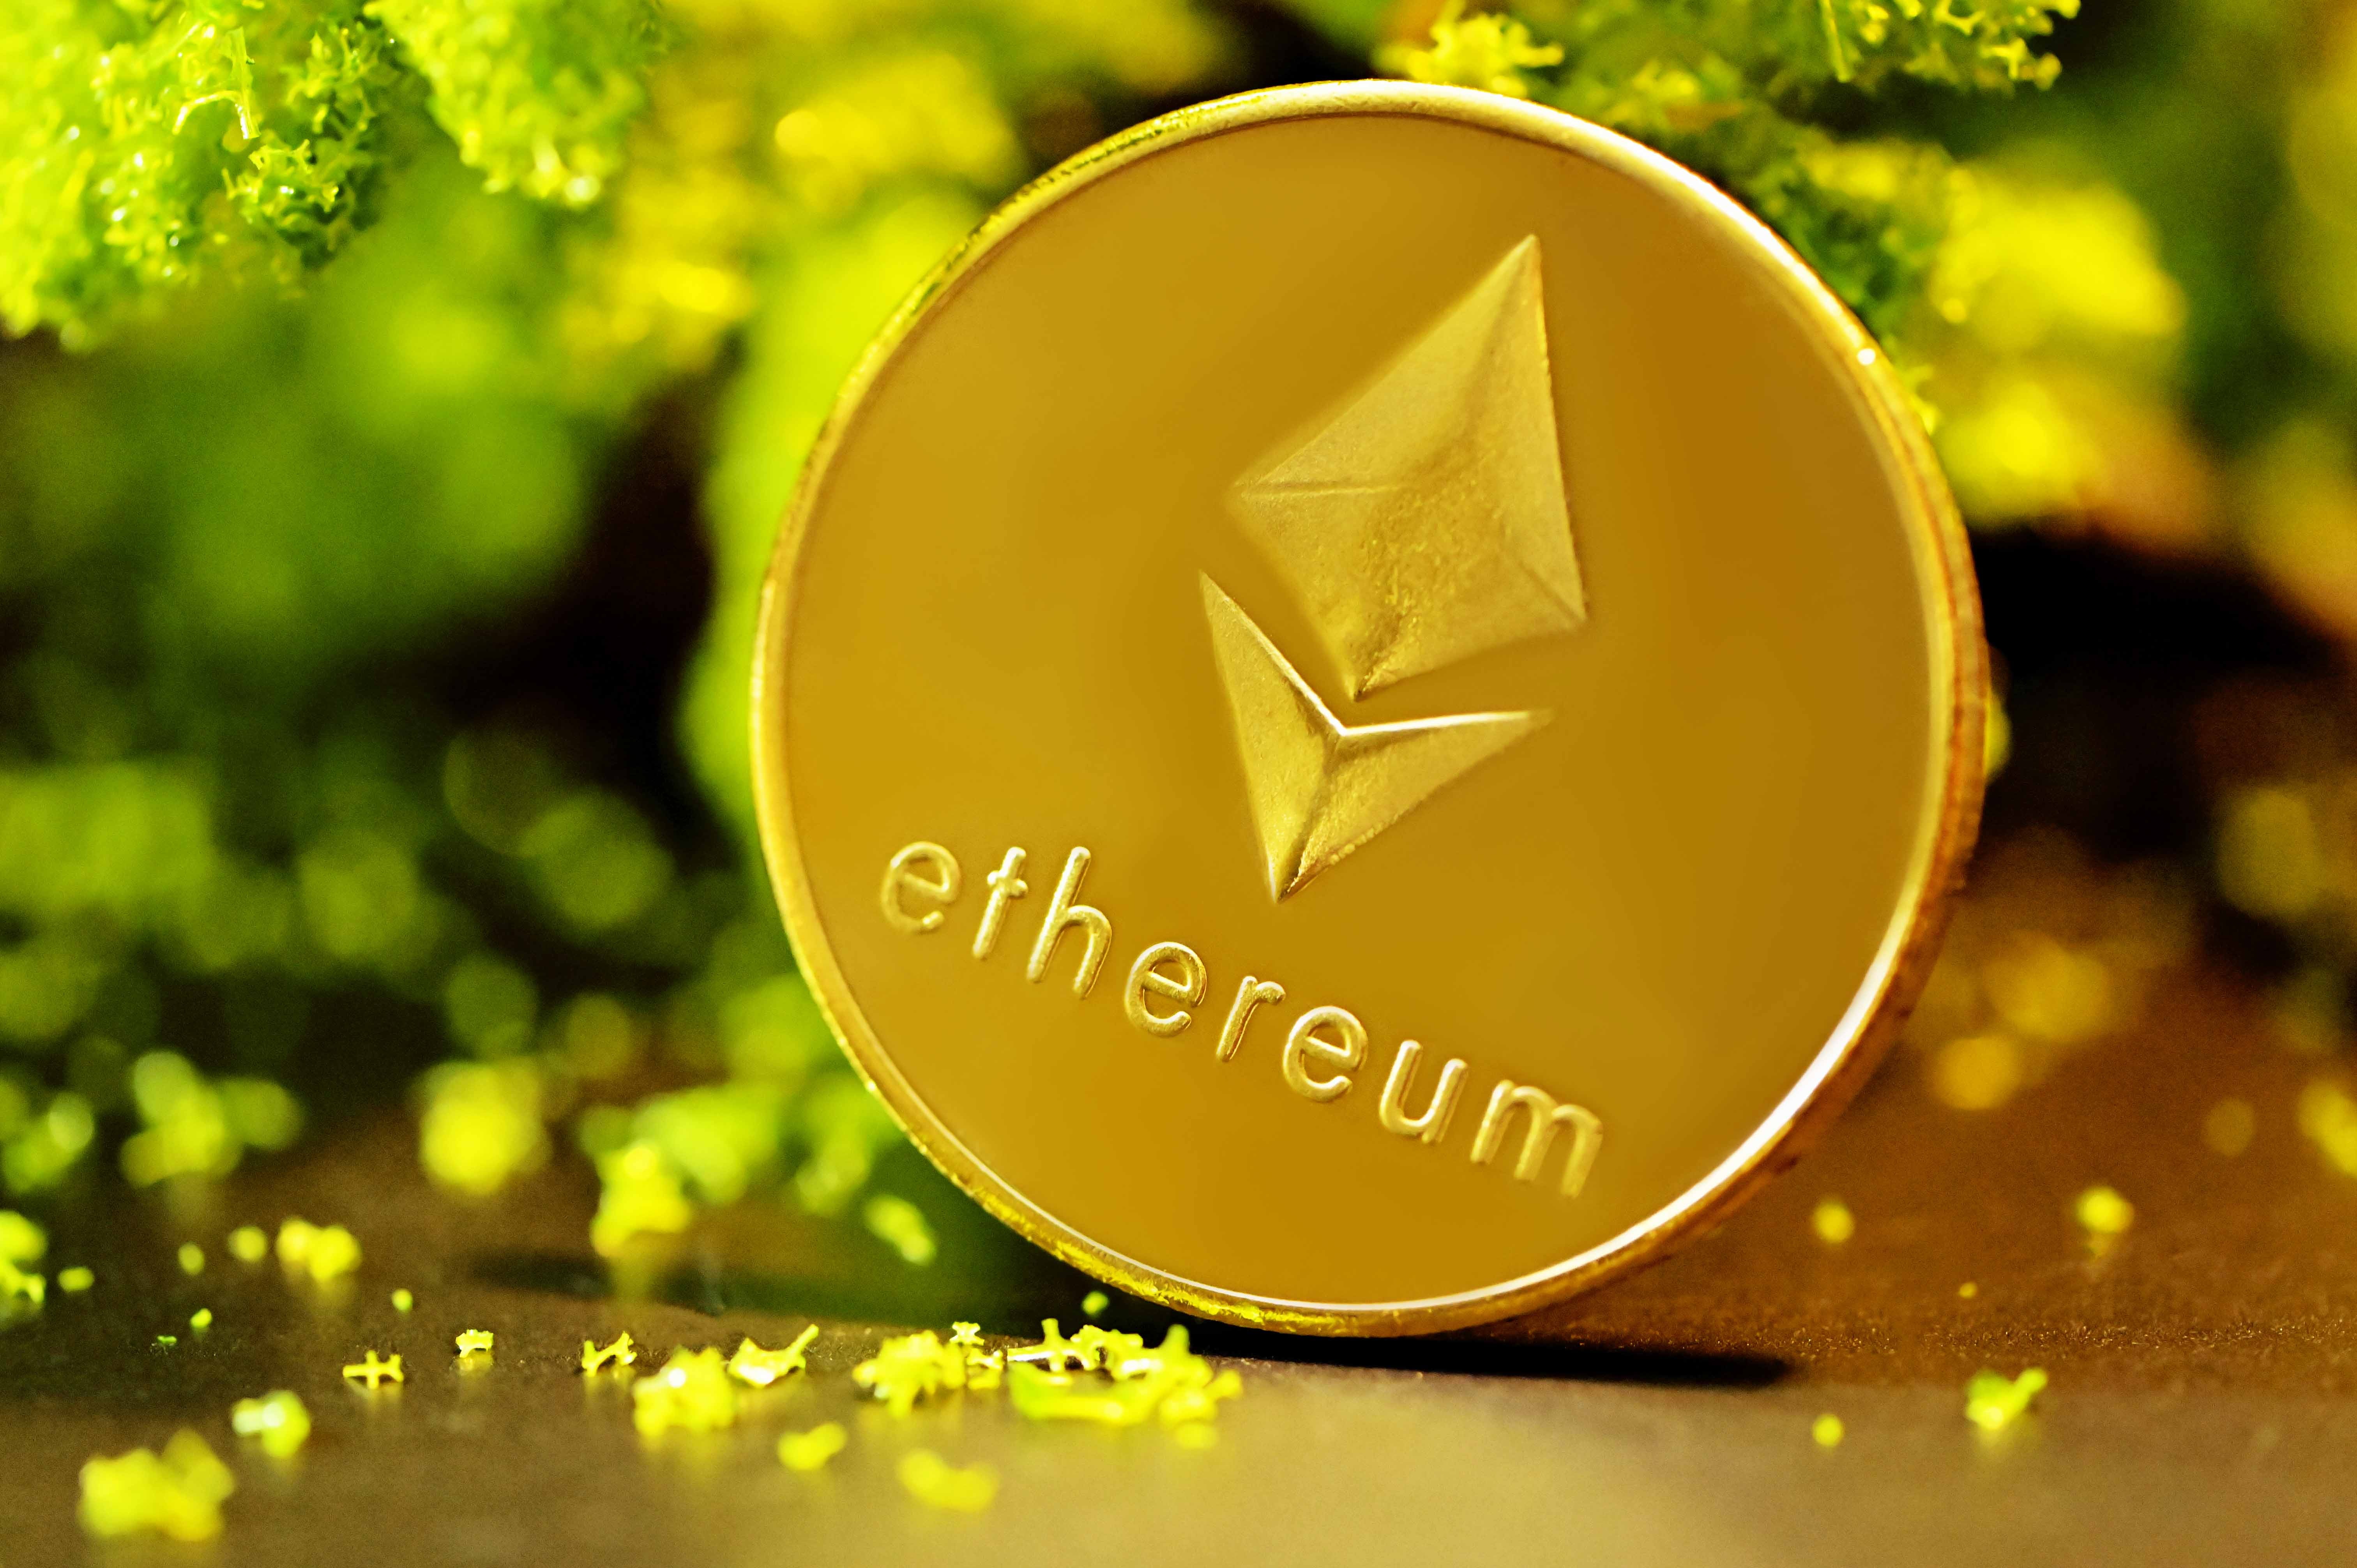 An Ethereum coin with a golden-green mossy background.